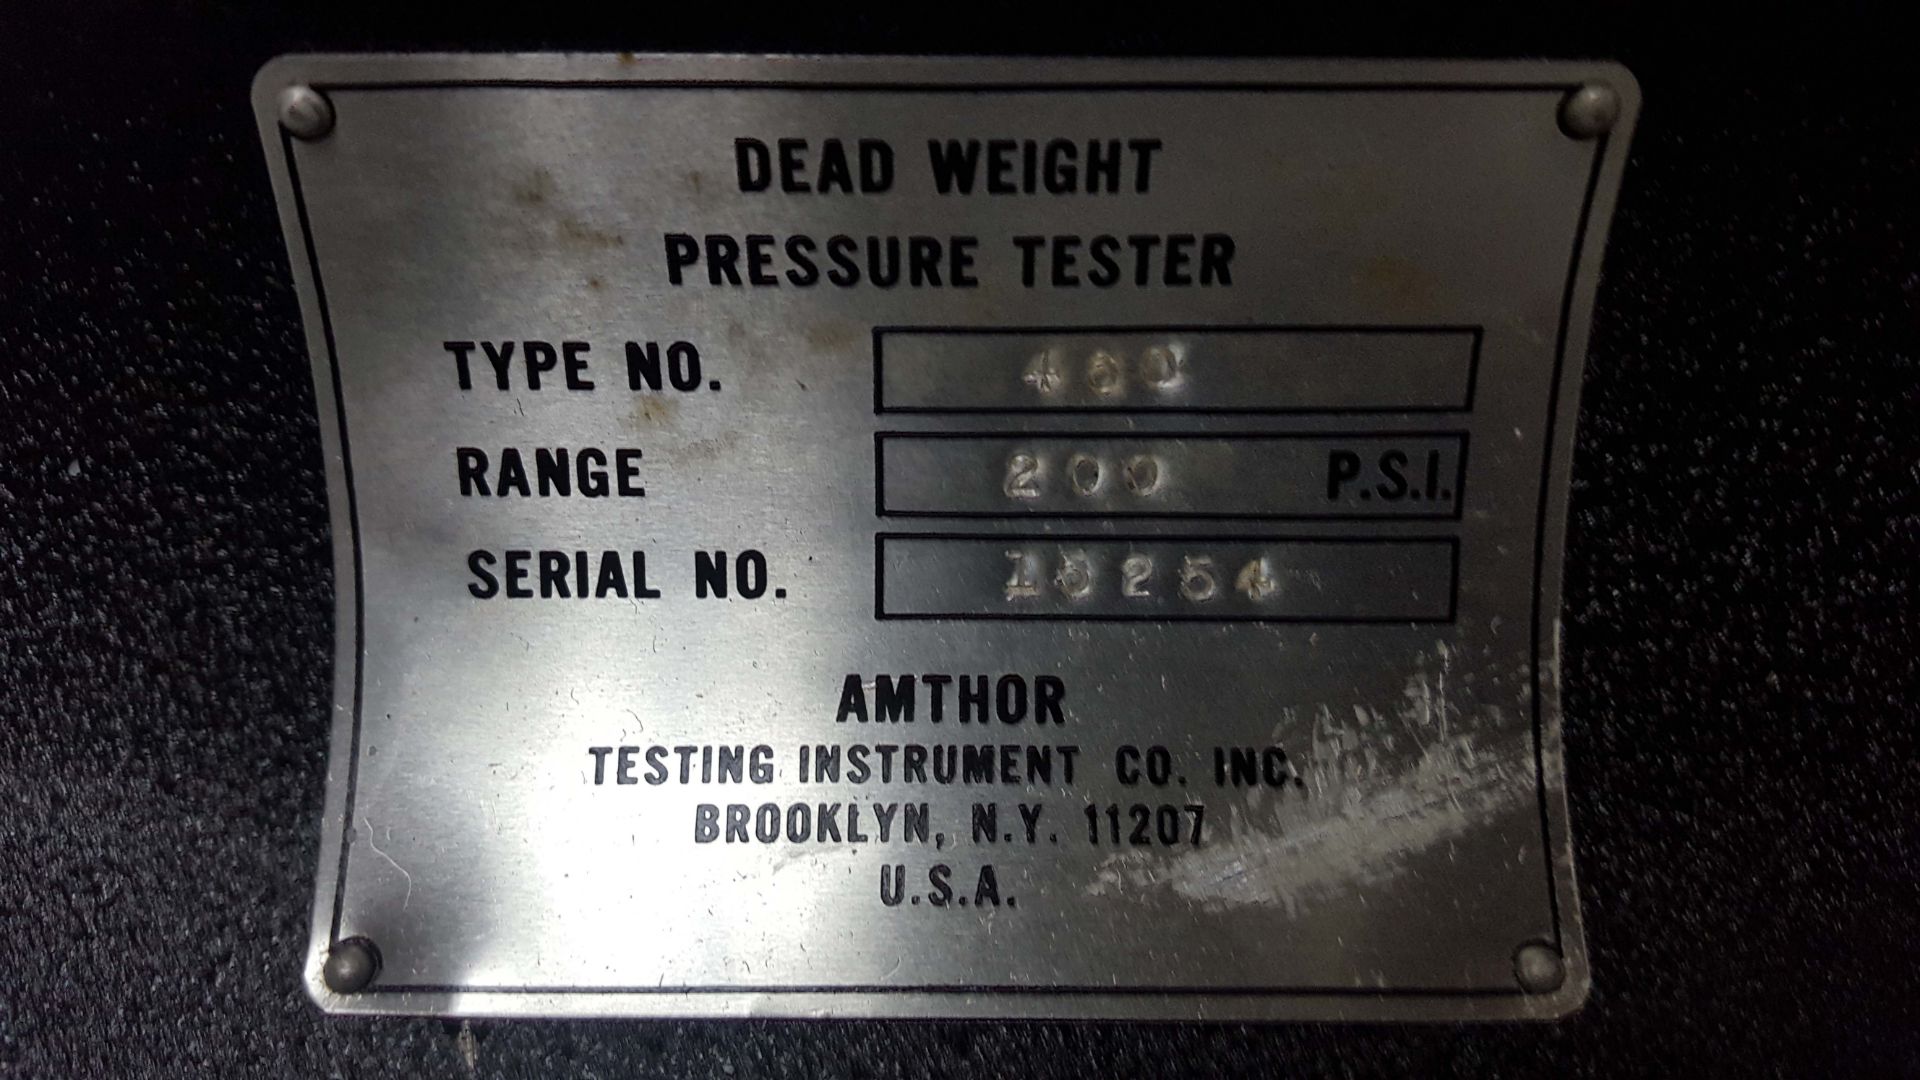 Amthor Dead Weight Pressure Tester Type 460 Range 200 PSI, s/n 15264 - Image 2 of 6